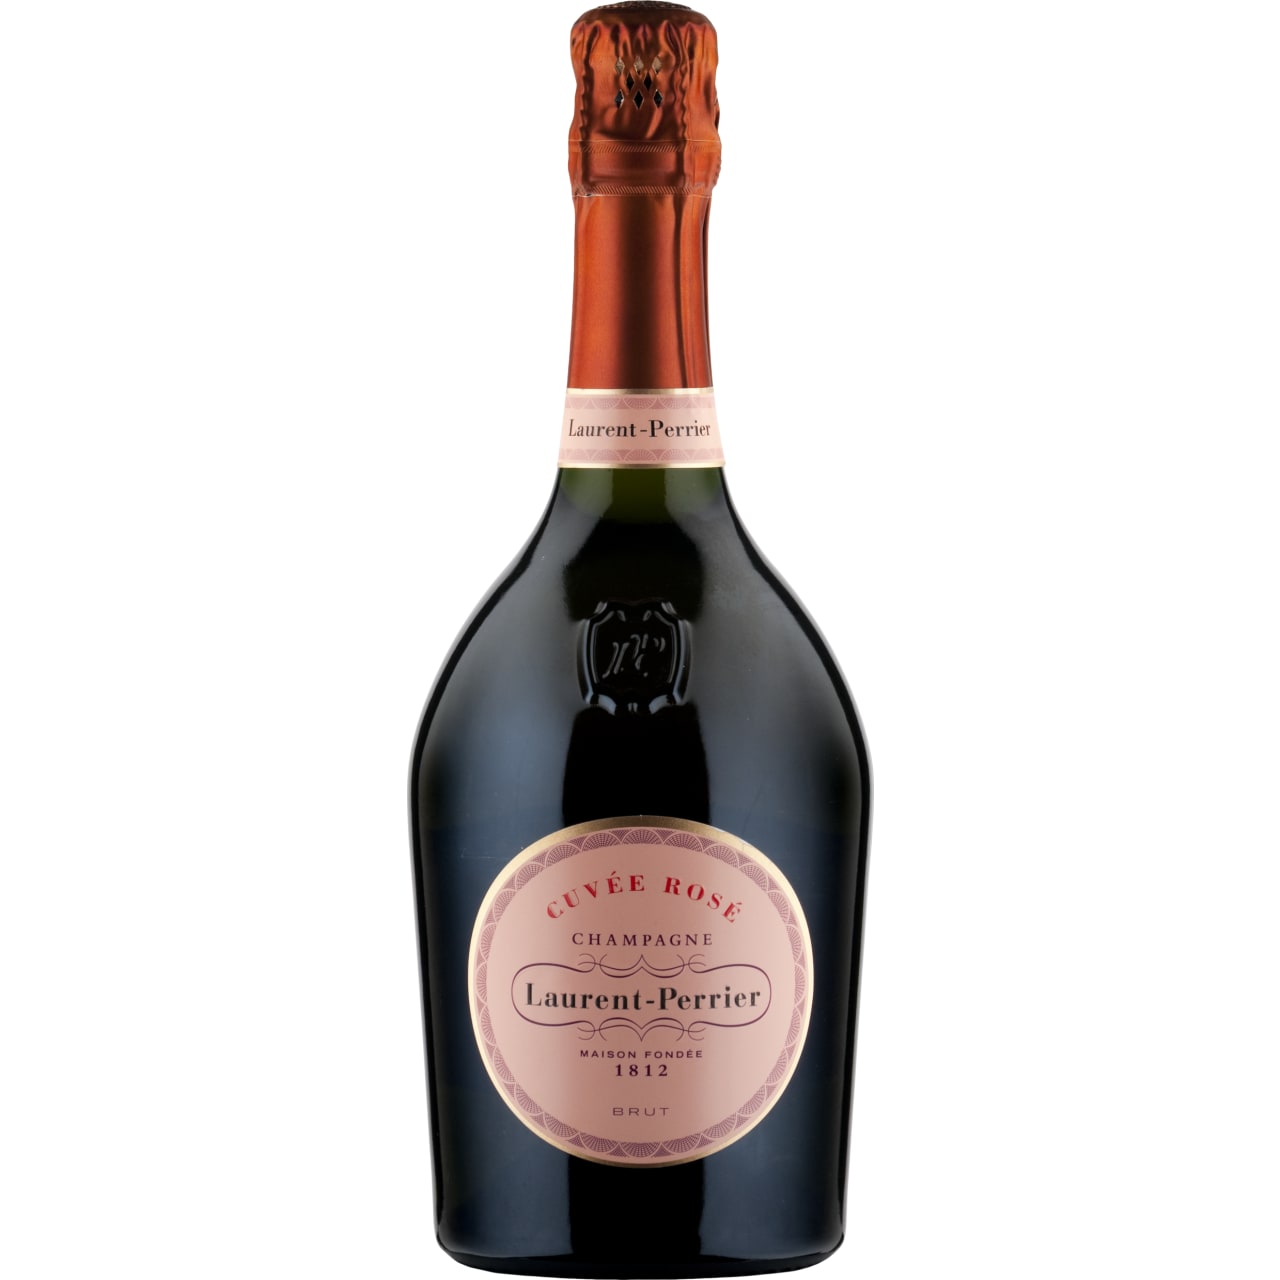 A rich raspberry nose, elegant strawberry fruits and a soft finish with a creamy texture.